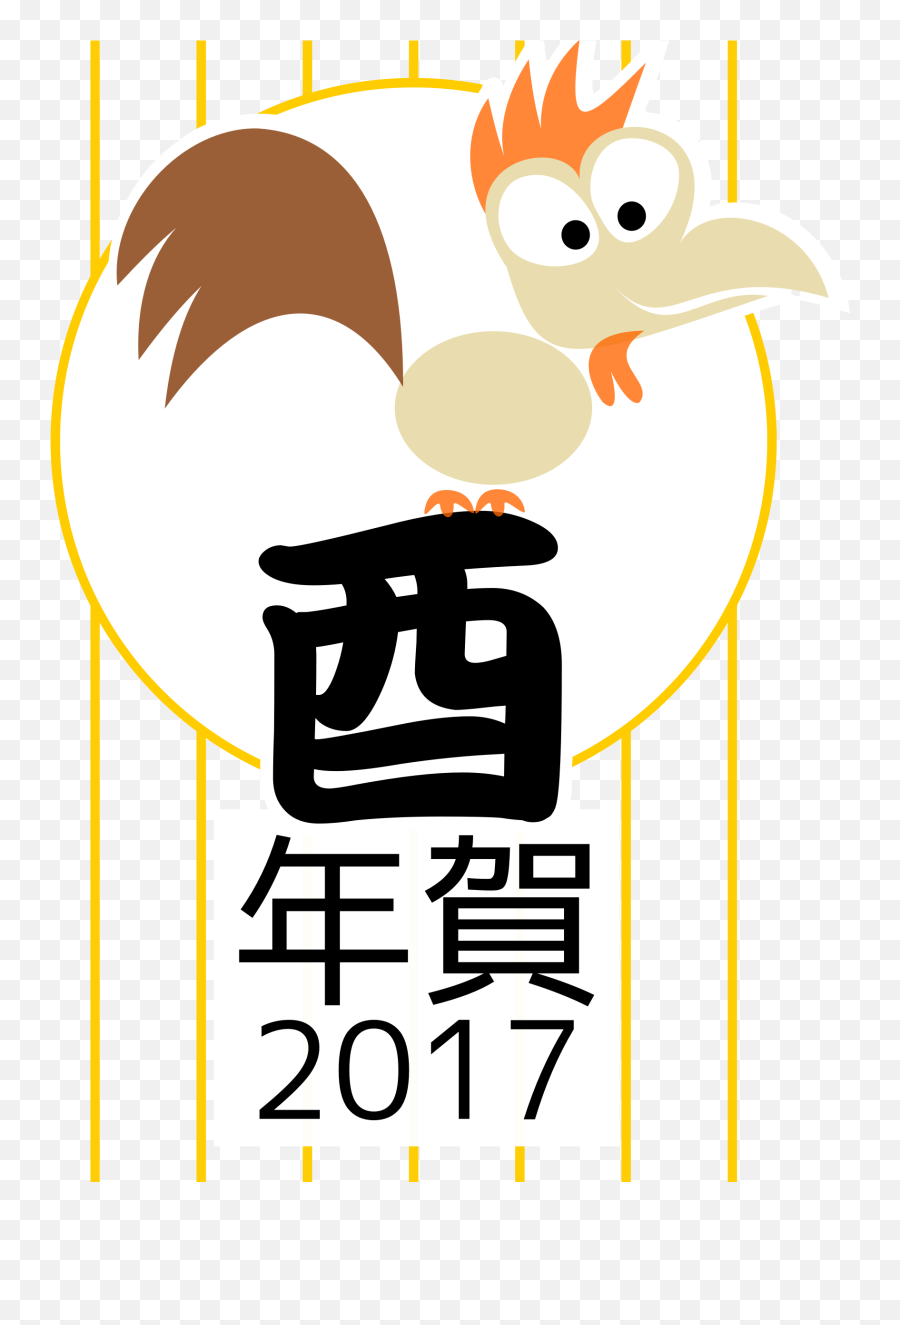 Download This Free Icons Png Design Of Chinese Zodiac - Rooster,How To Get Rooster Icon